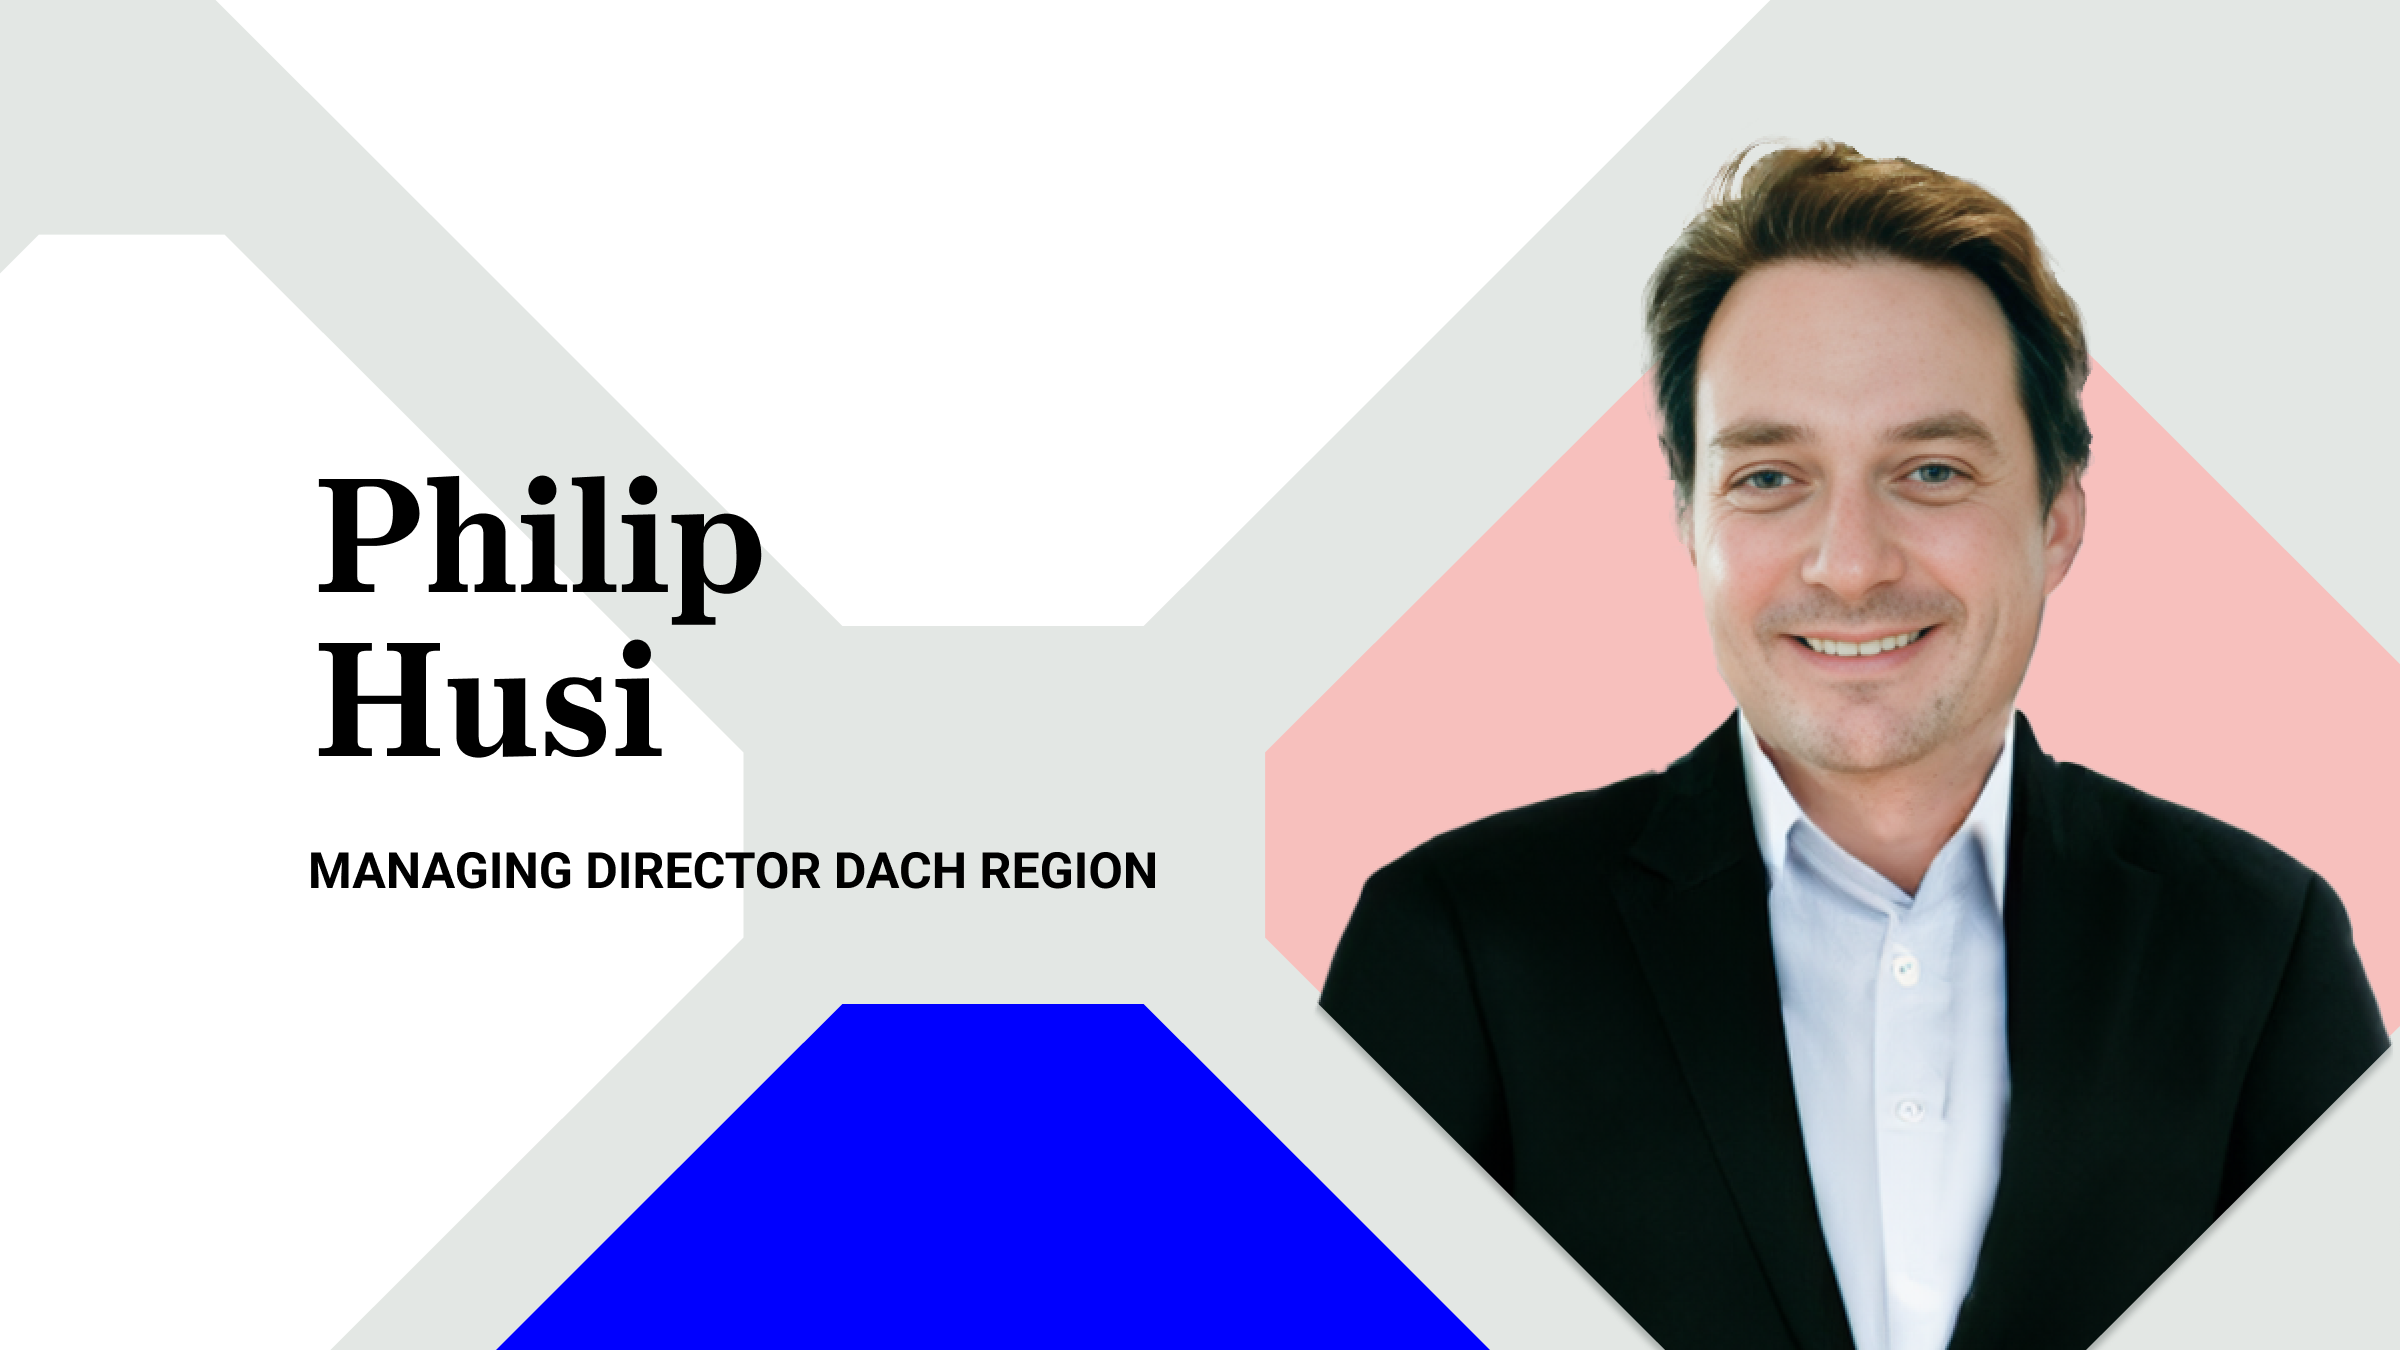 Philip Husi joins InvestSuite as Managing Director DACH region